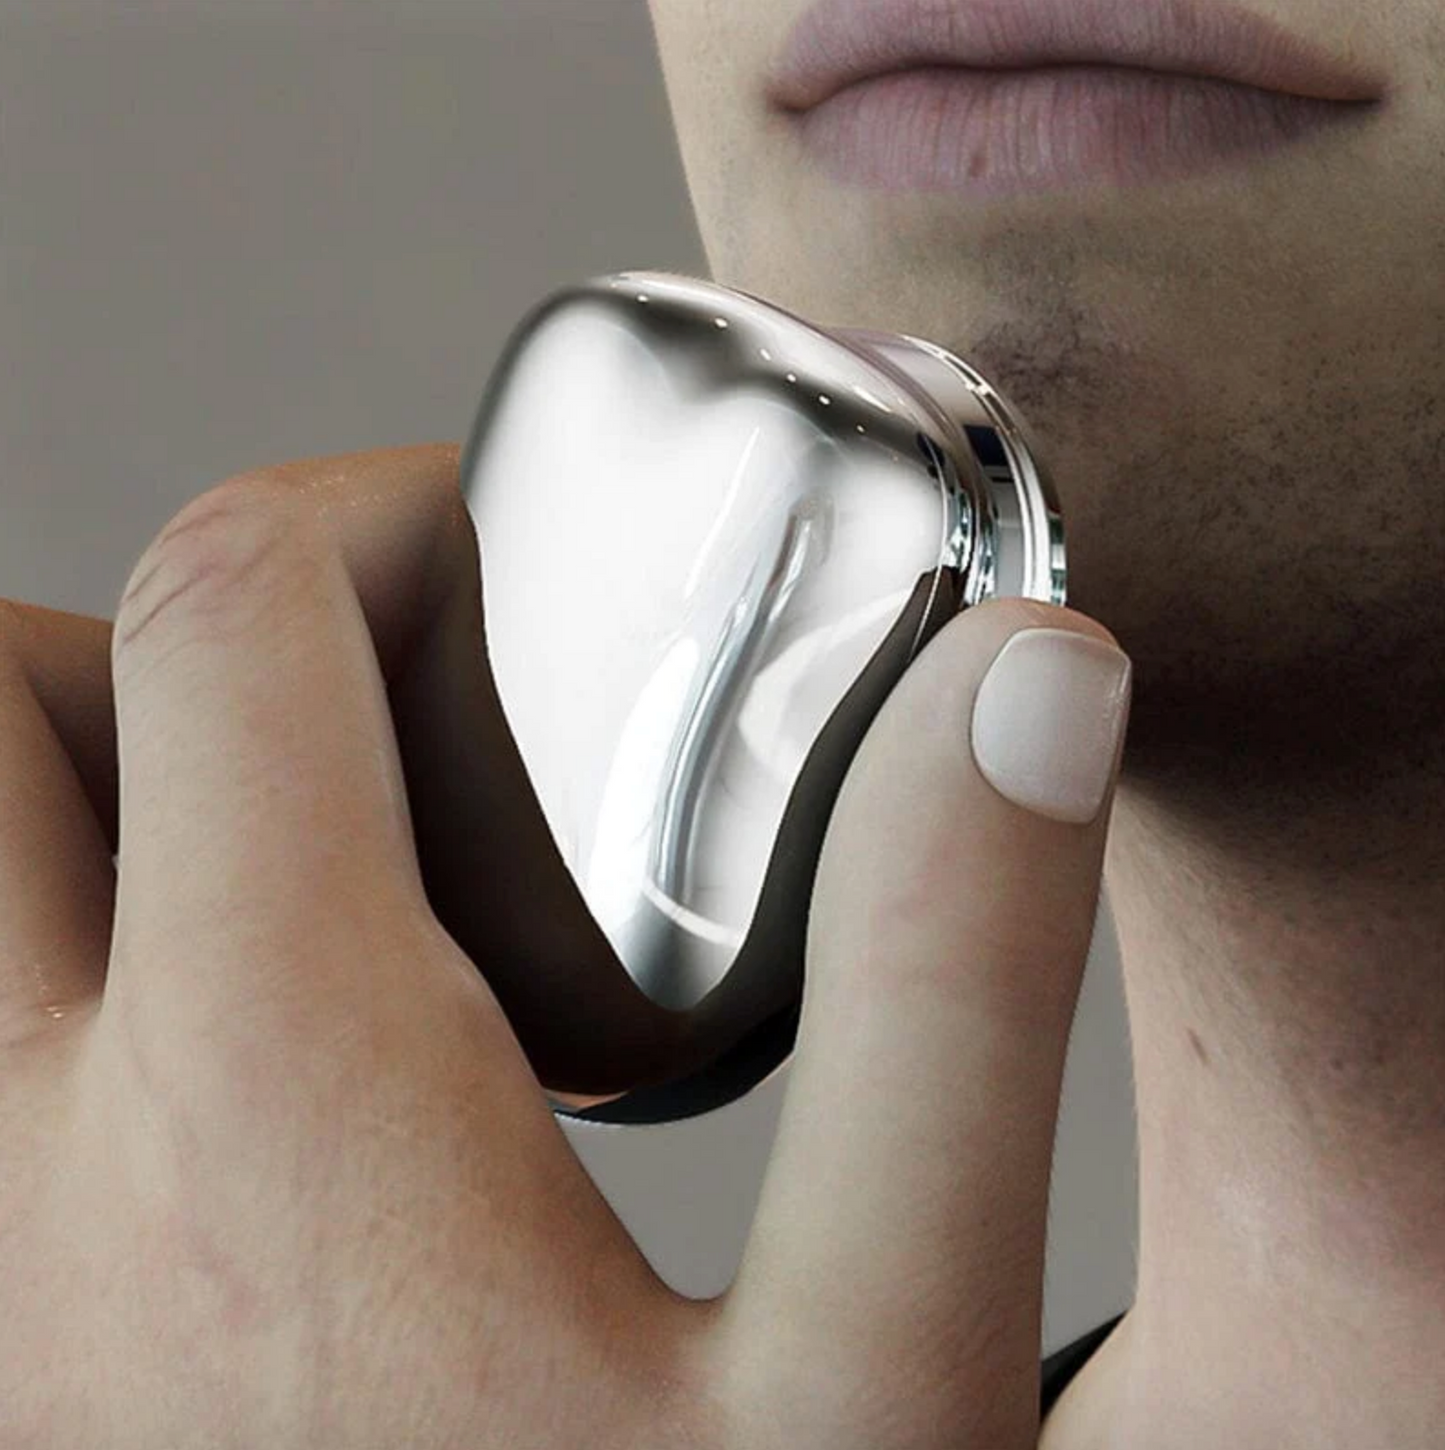 [New 2023 Launch] Ultra-Portable & Light-Weighted Shaver - Waterproof